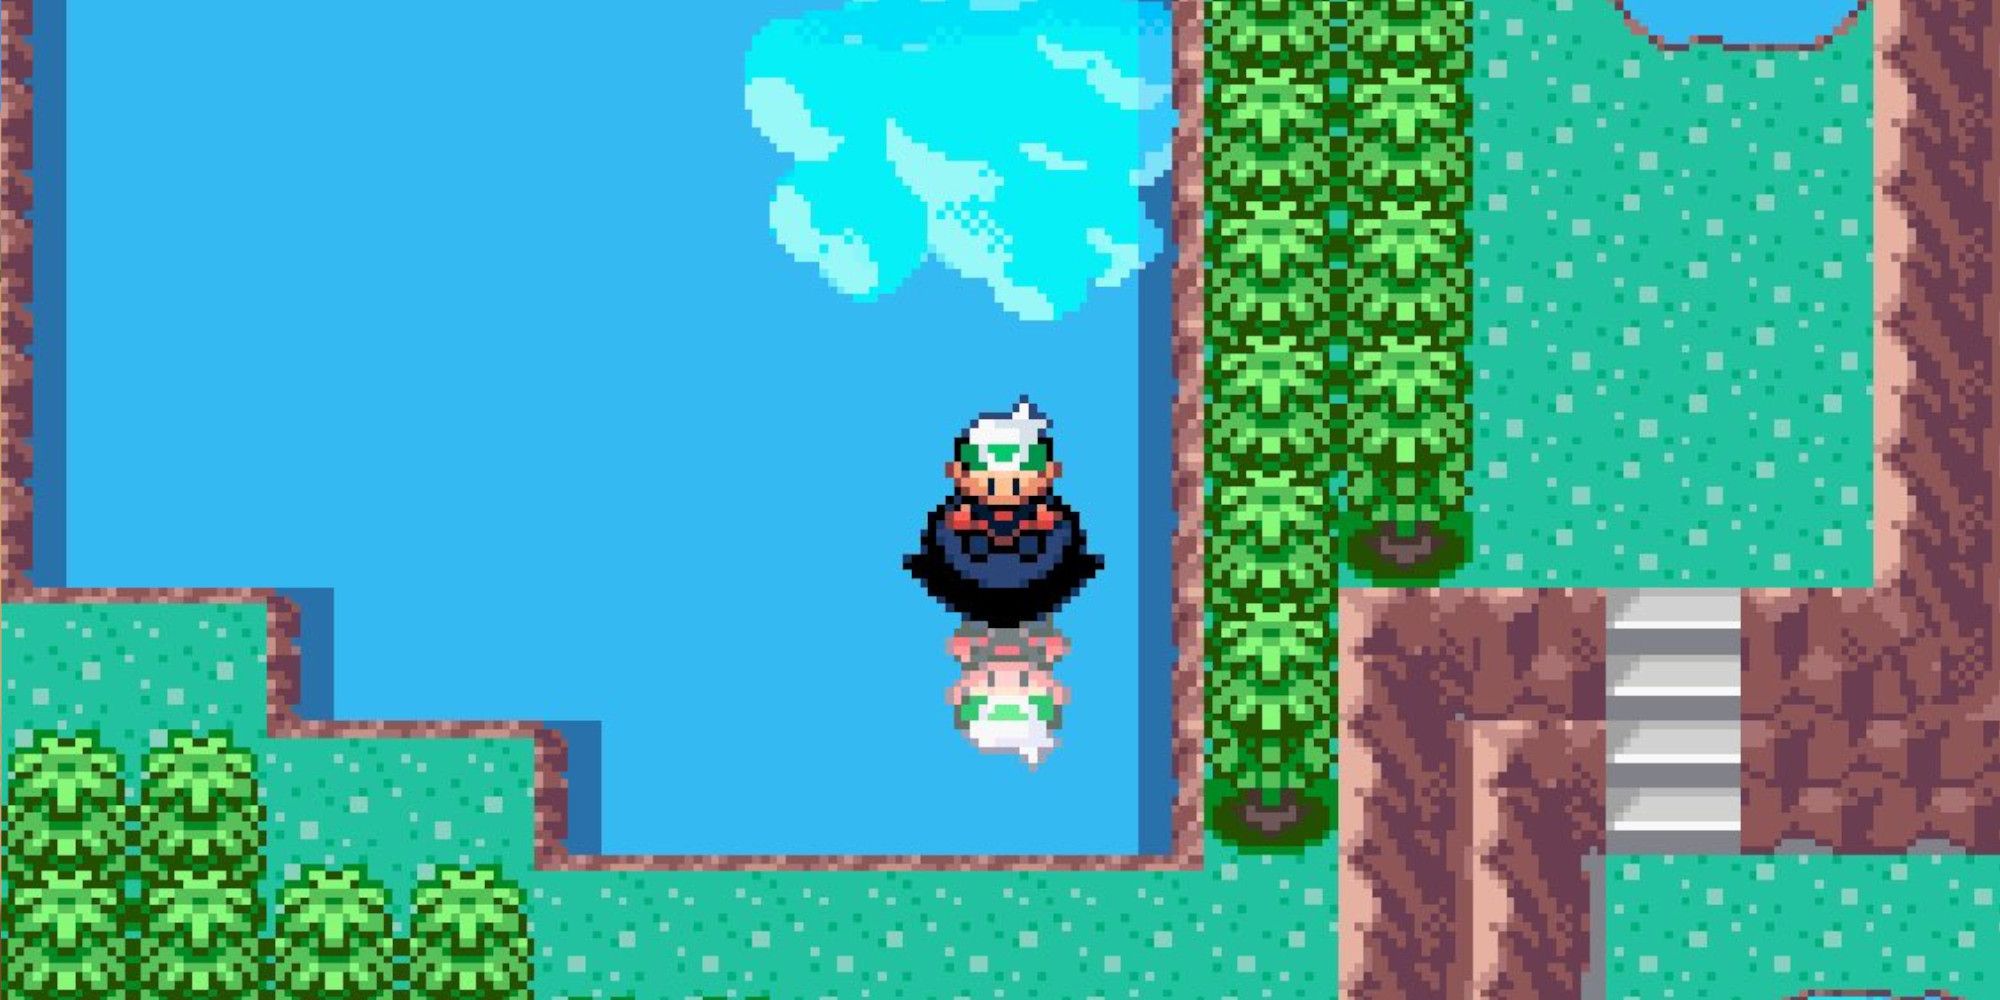 brendan surfs on a pokemon and looks at his reflection in the water as a cloud is also reflected overhead